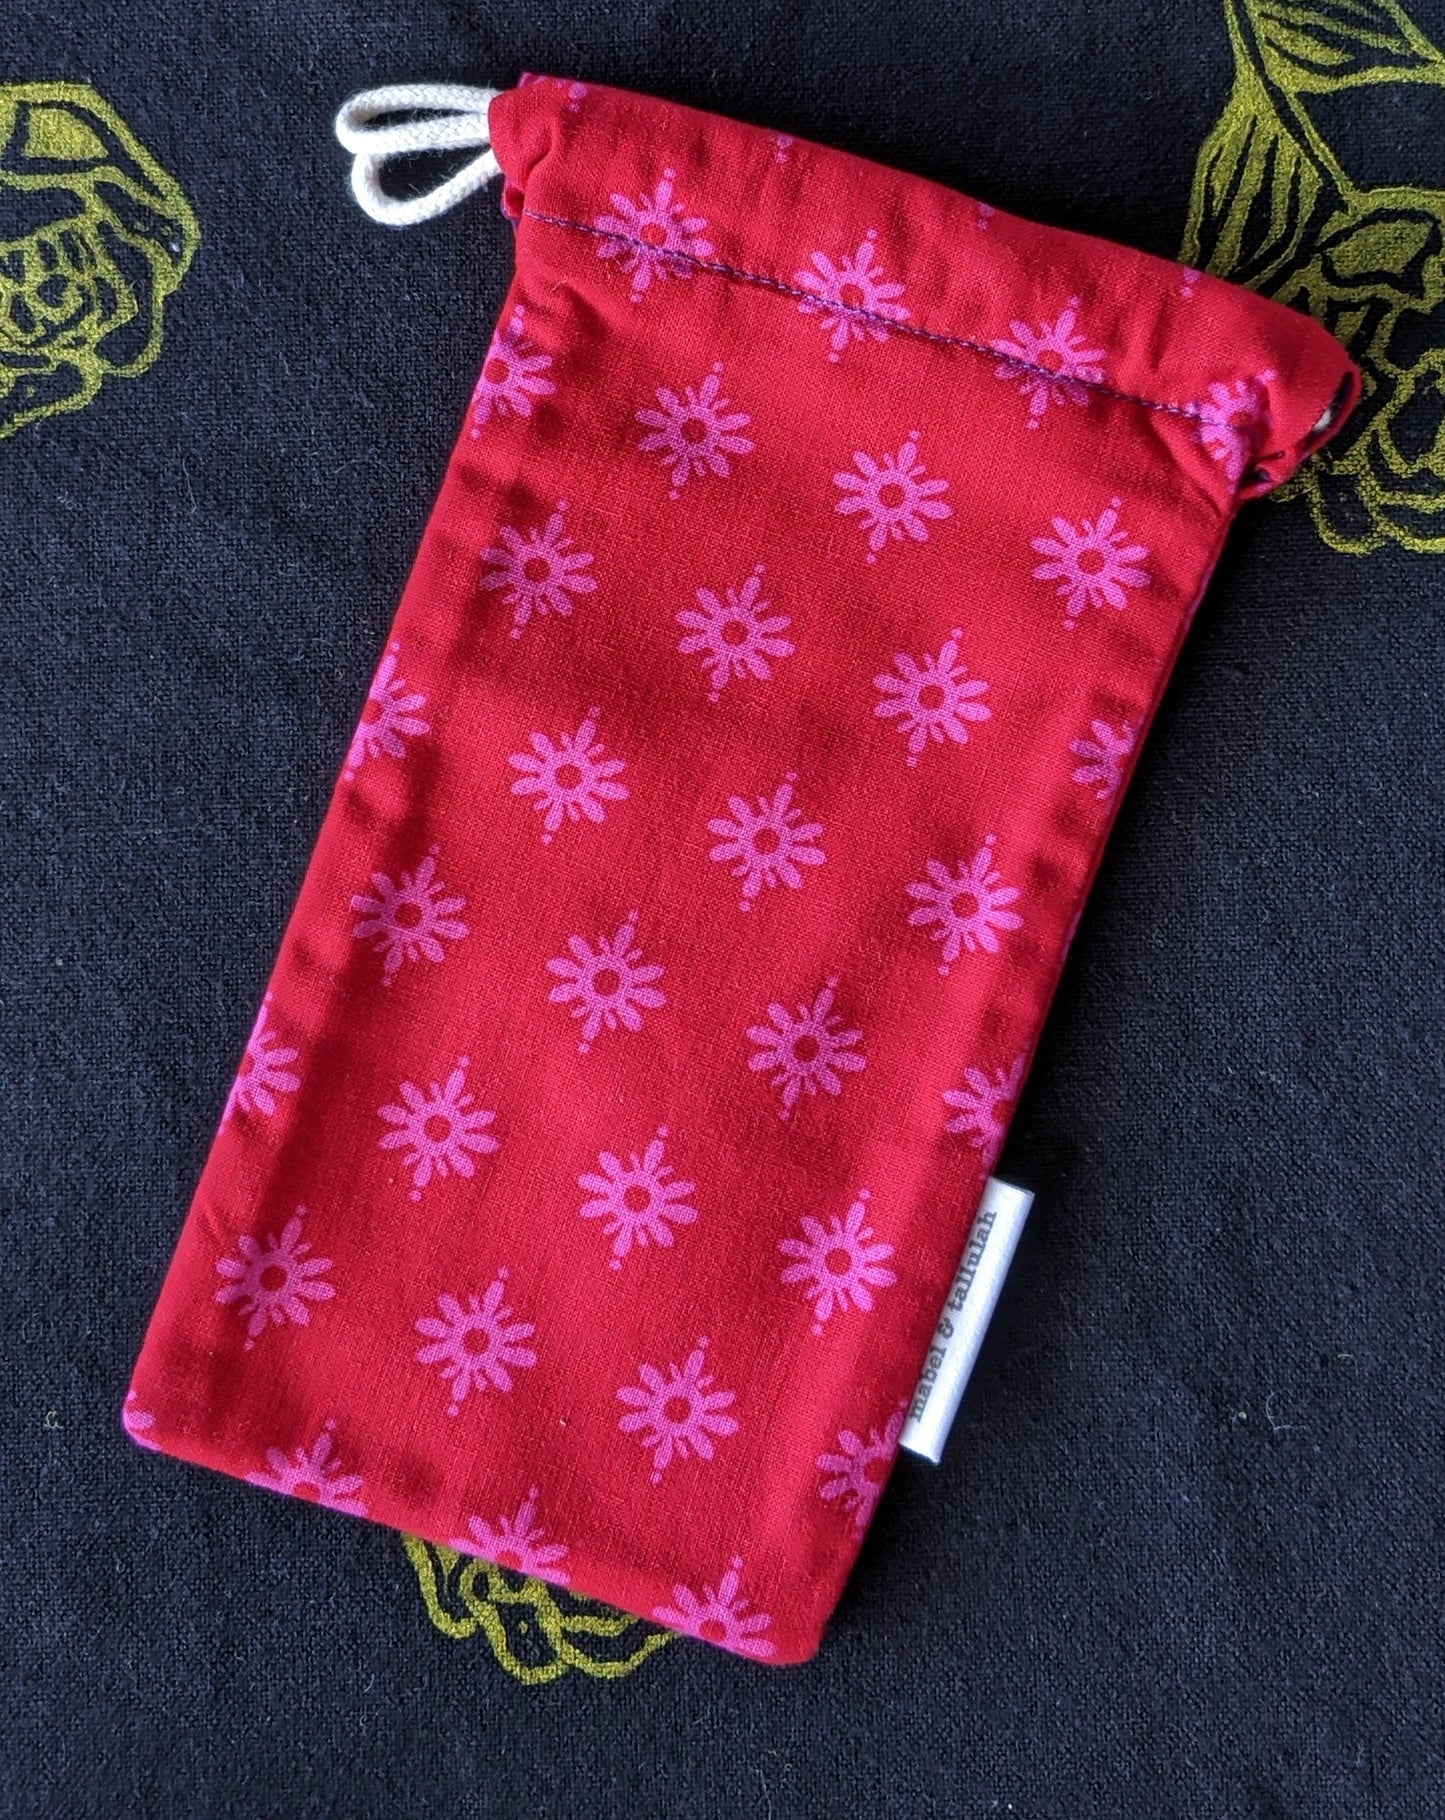 Flower on red sunglasses cover mini pouch by The Arthly Box